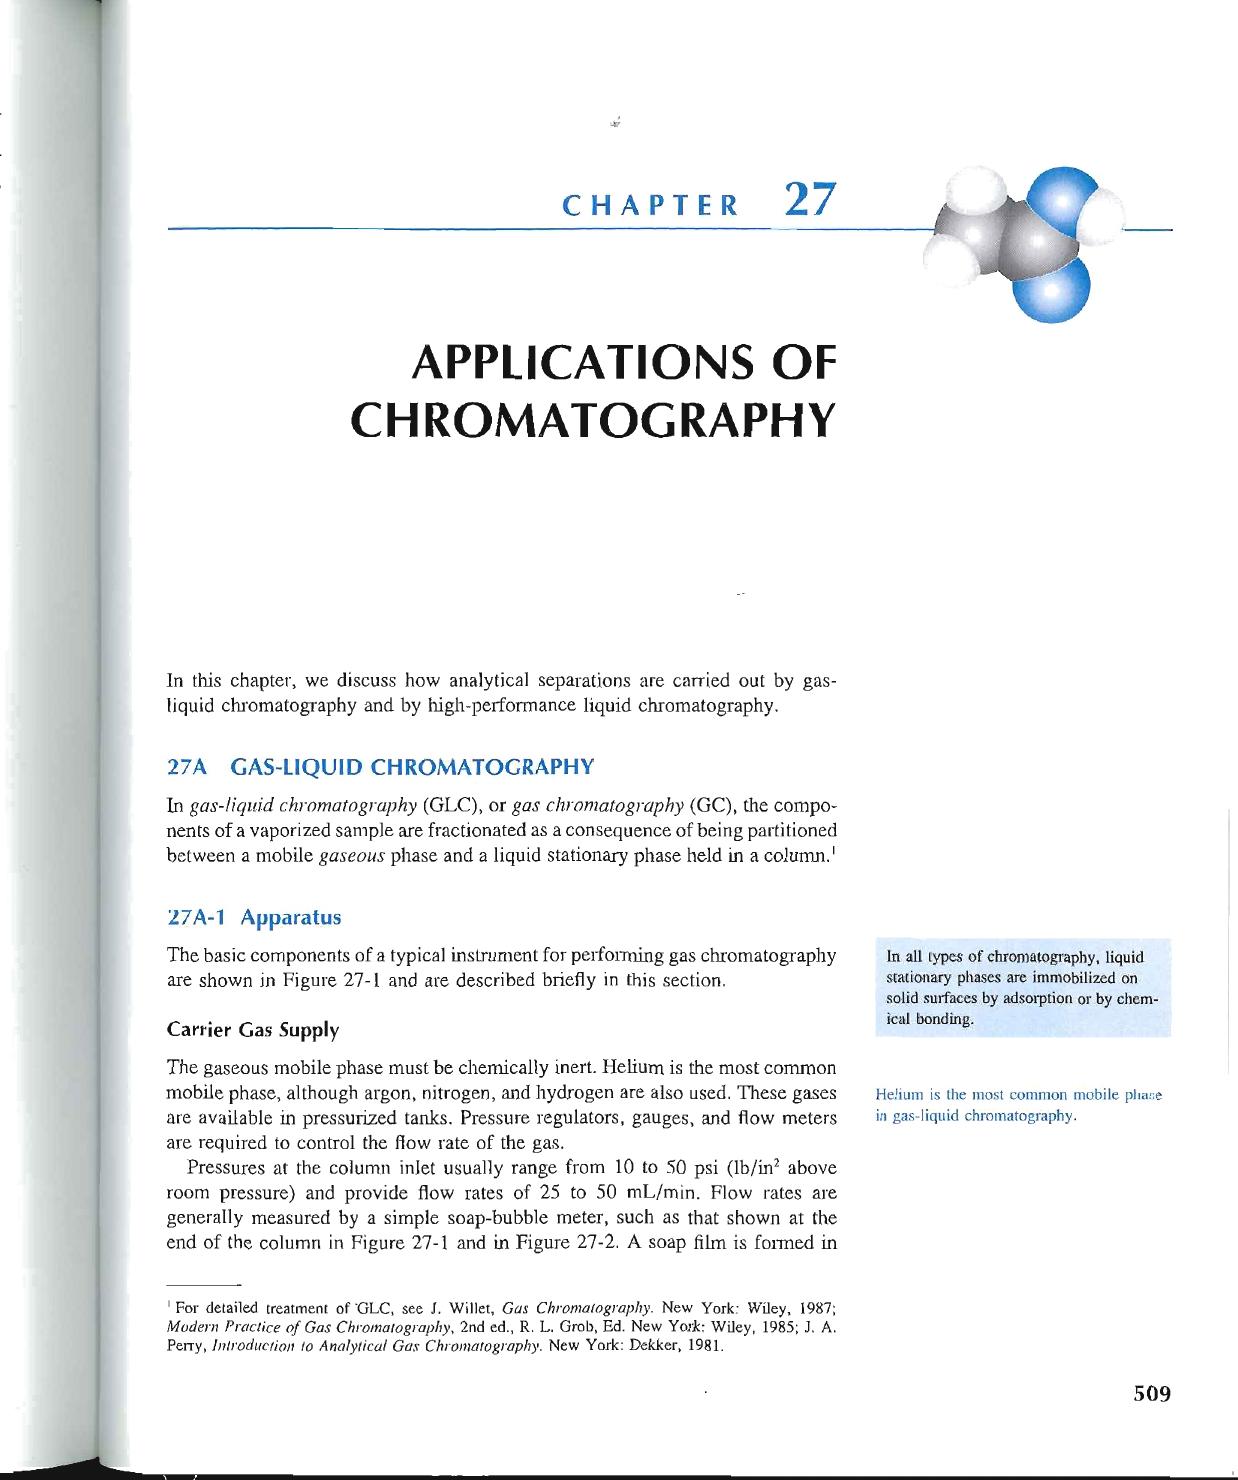 APPLICATIONS OF CHROMATOGRAPHY